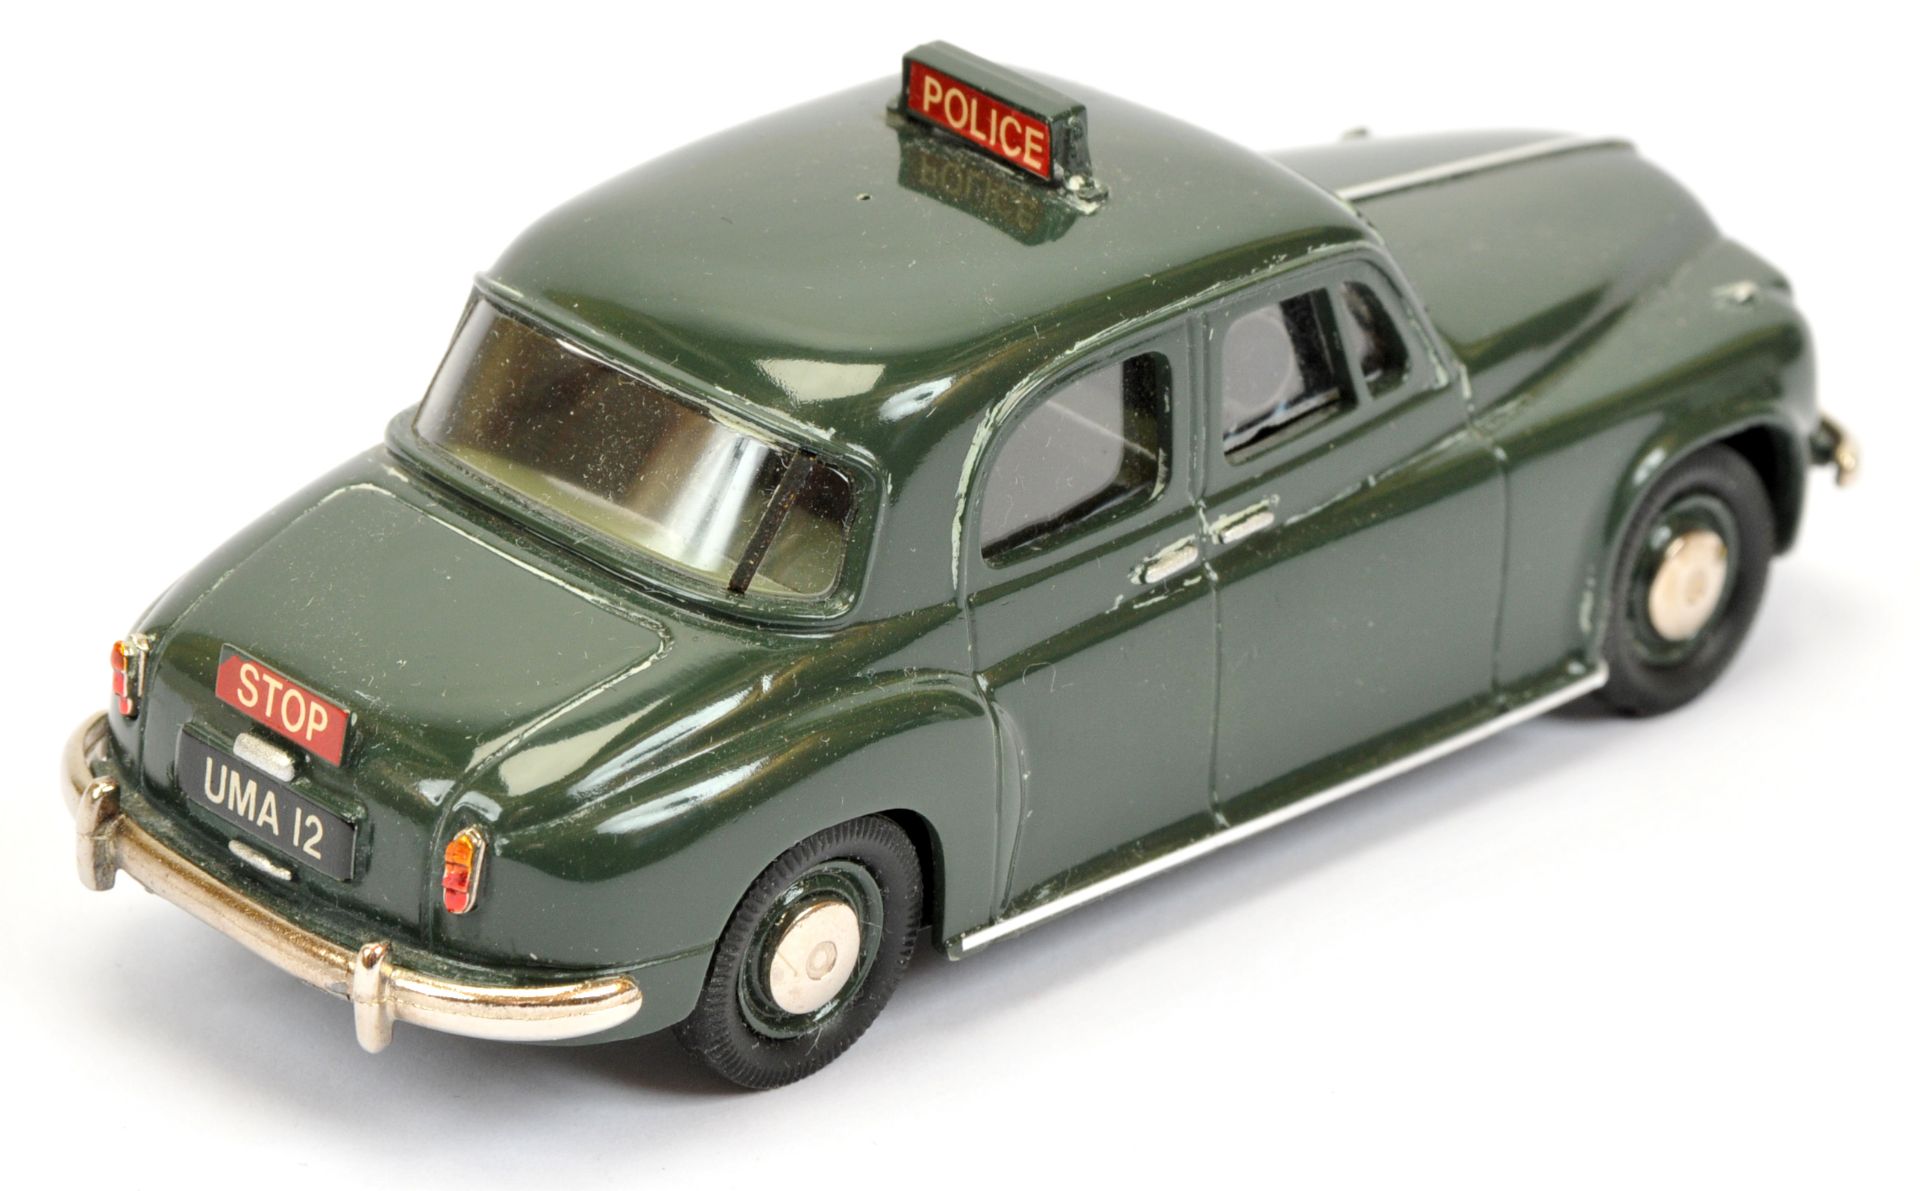 Jemini Model Reproductions JMR001 1955 Rover 90 Police "Cheshire Constabulary"  - Image 2 of 2